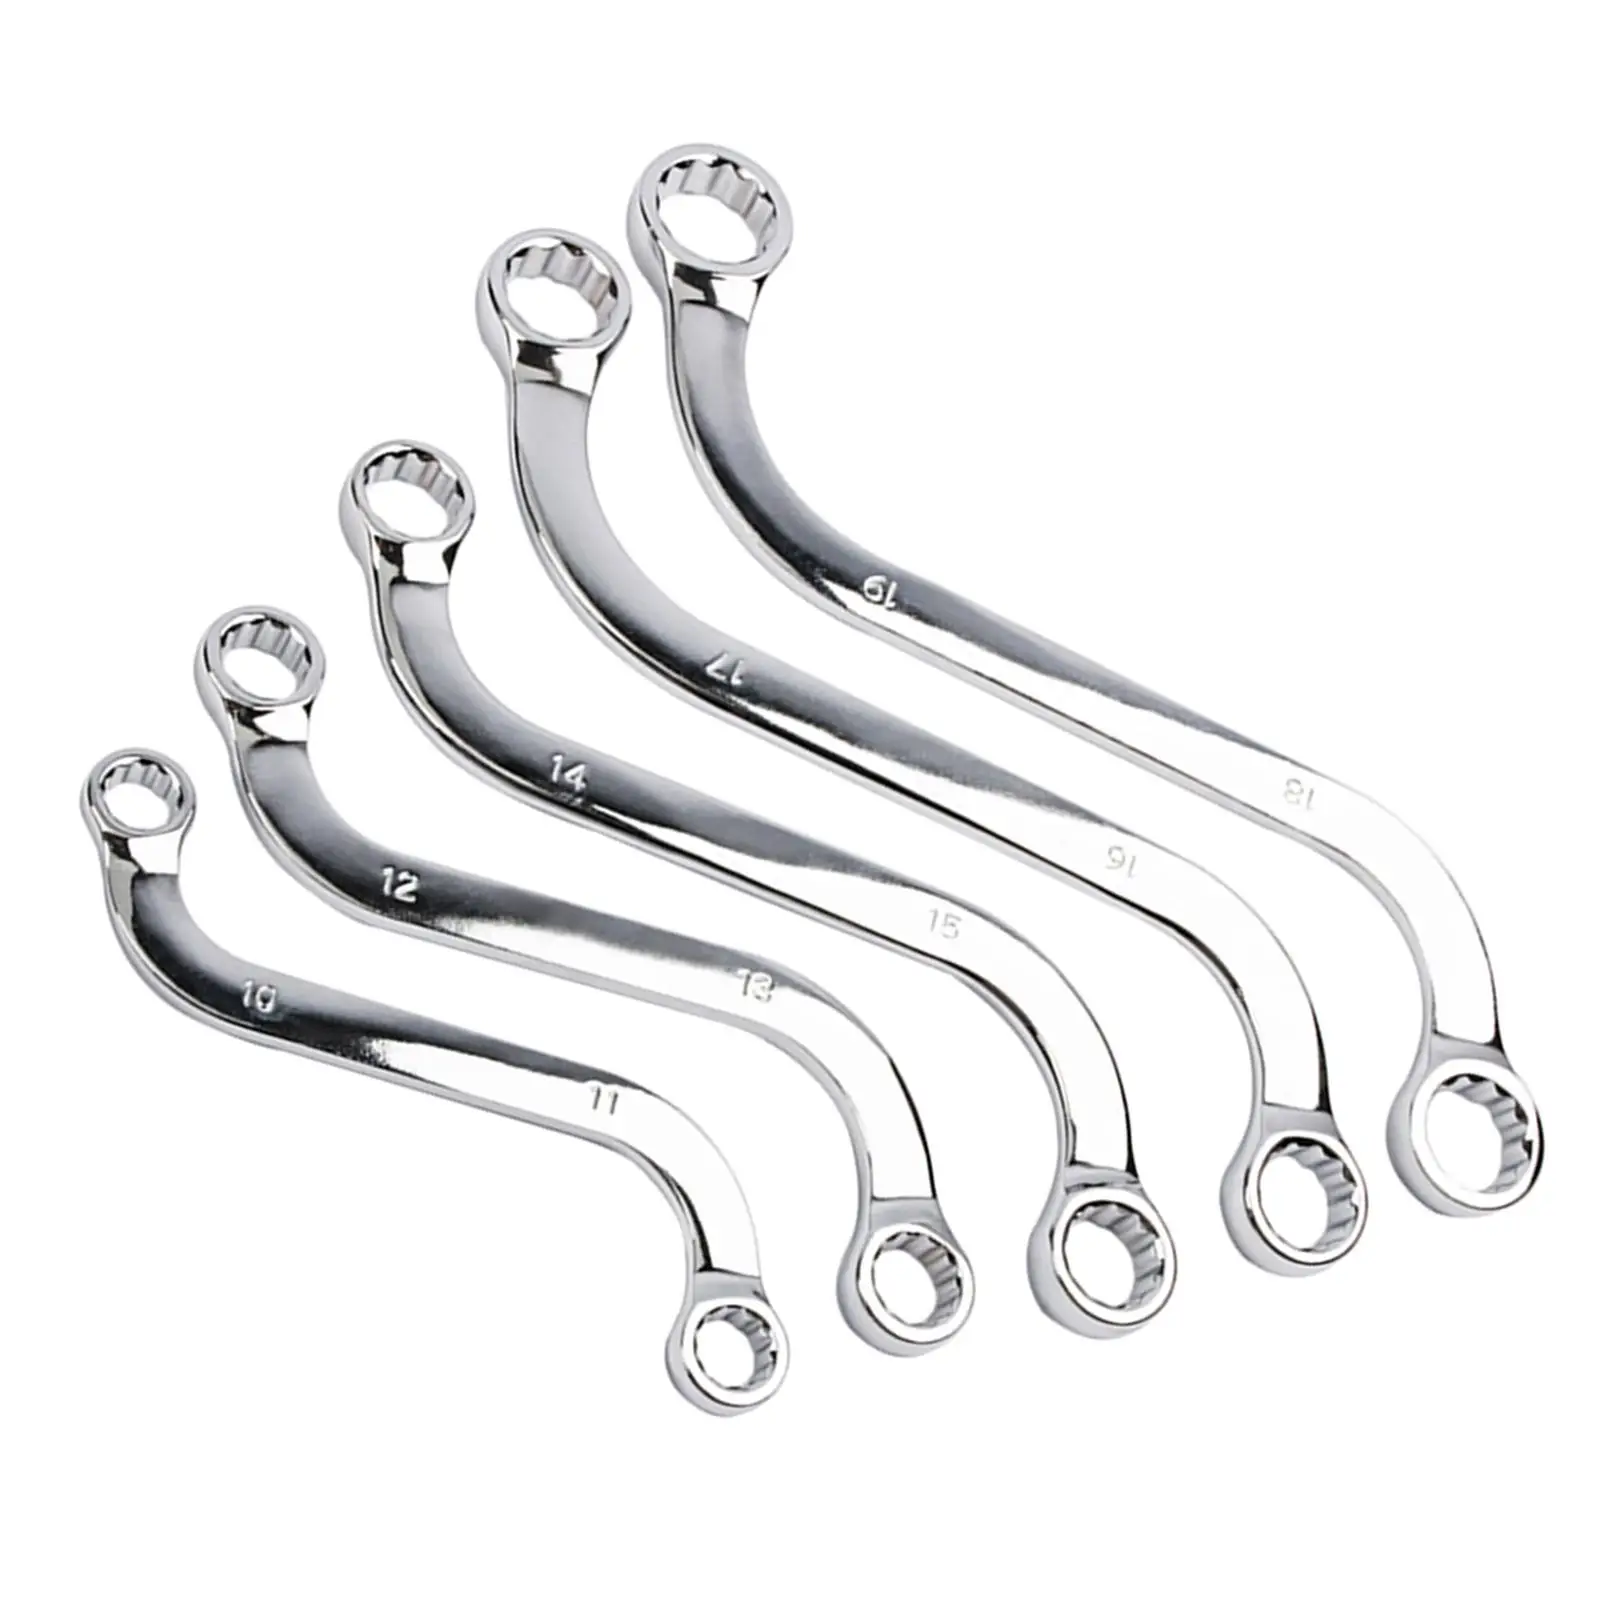 5x Universal S Type Wrench Set Sturdy Self Tightening Double Sided Portable Screw Nuts Wrench Repair Tool for Outdoor Home Auto